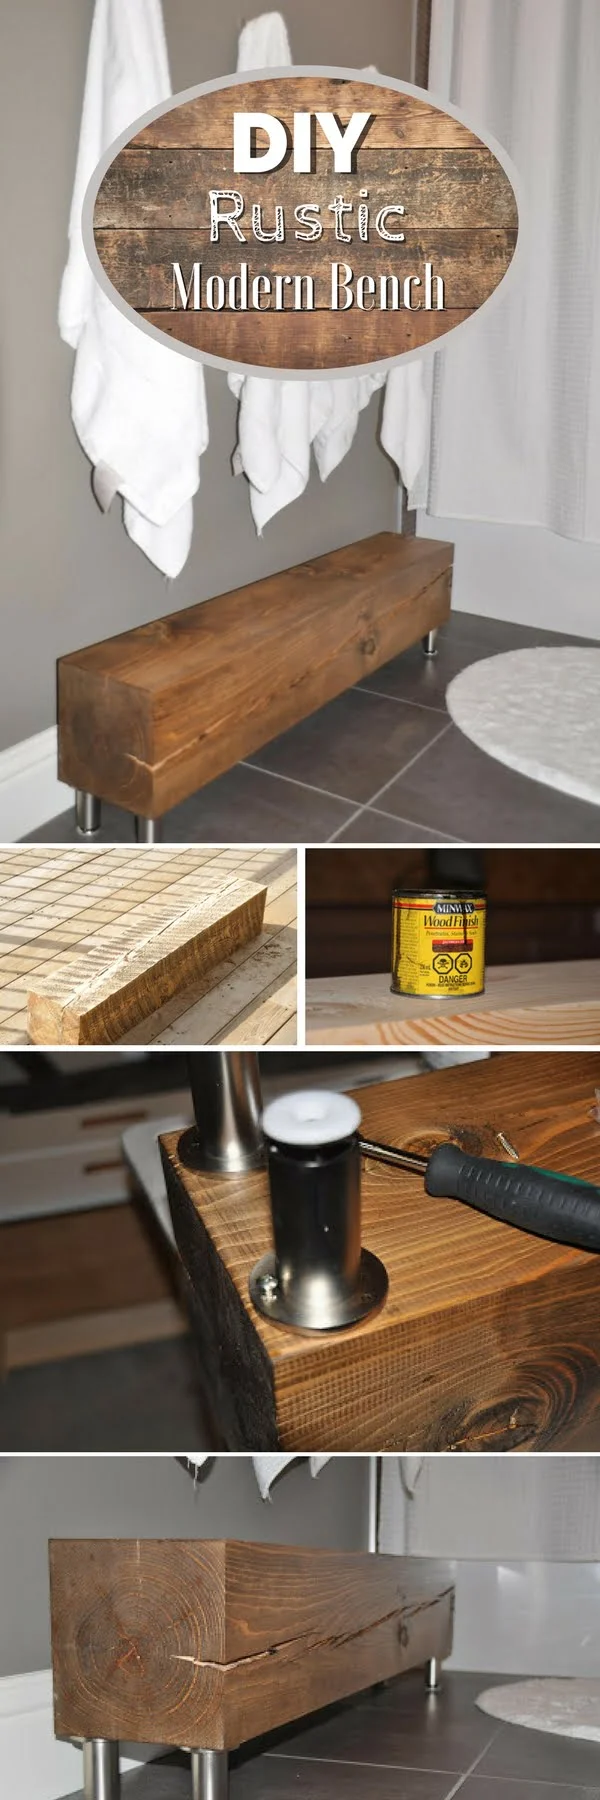 Check out how to build an easy DIY rustic modern bench